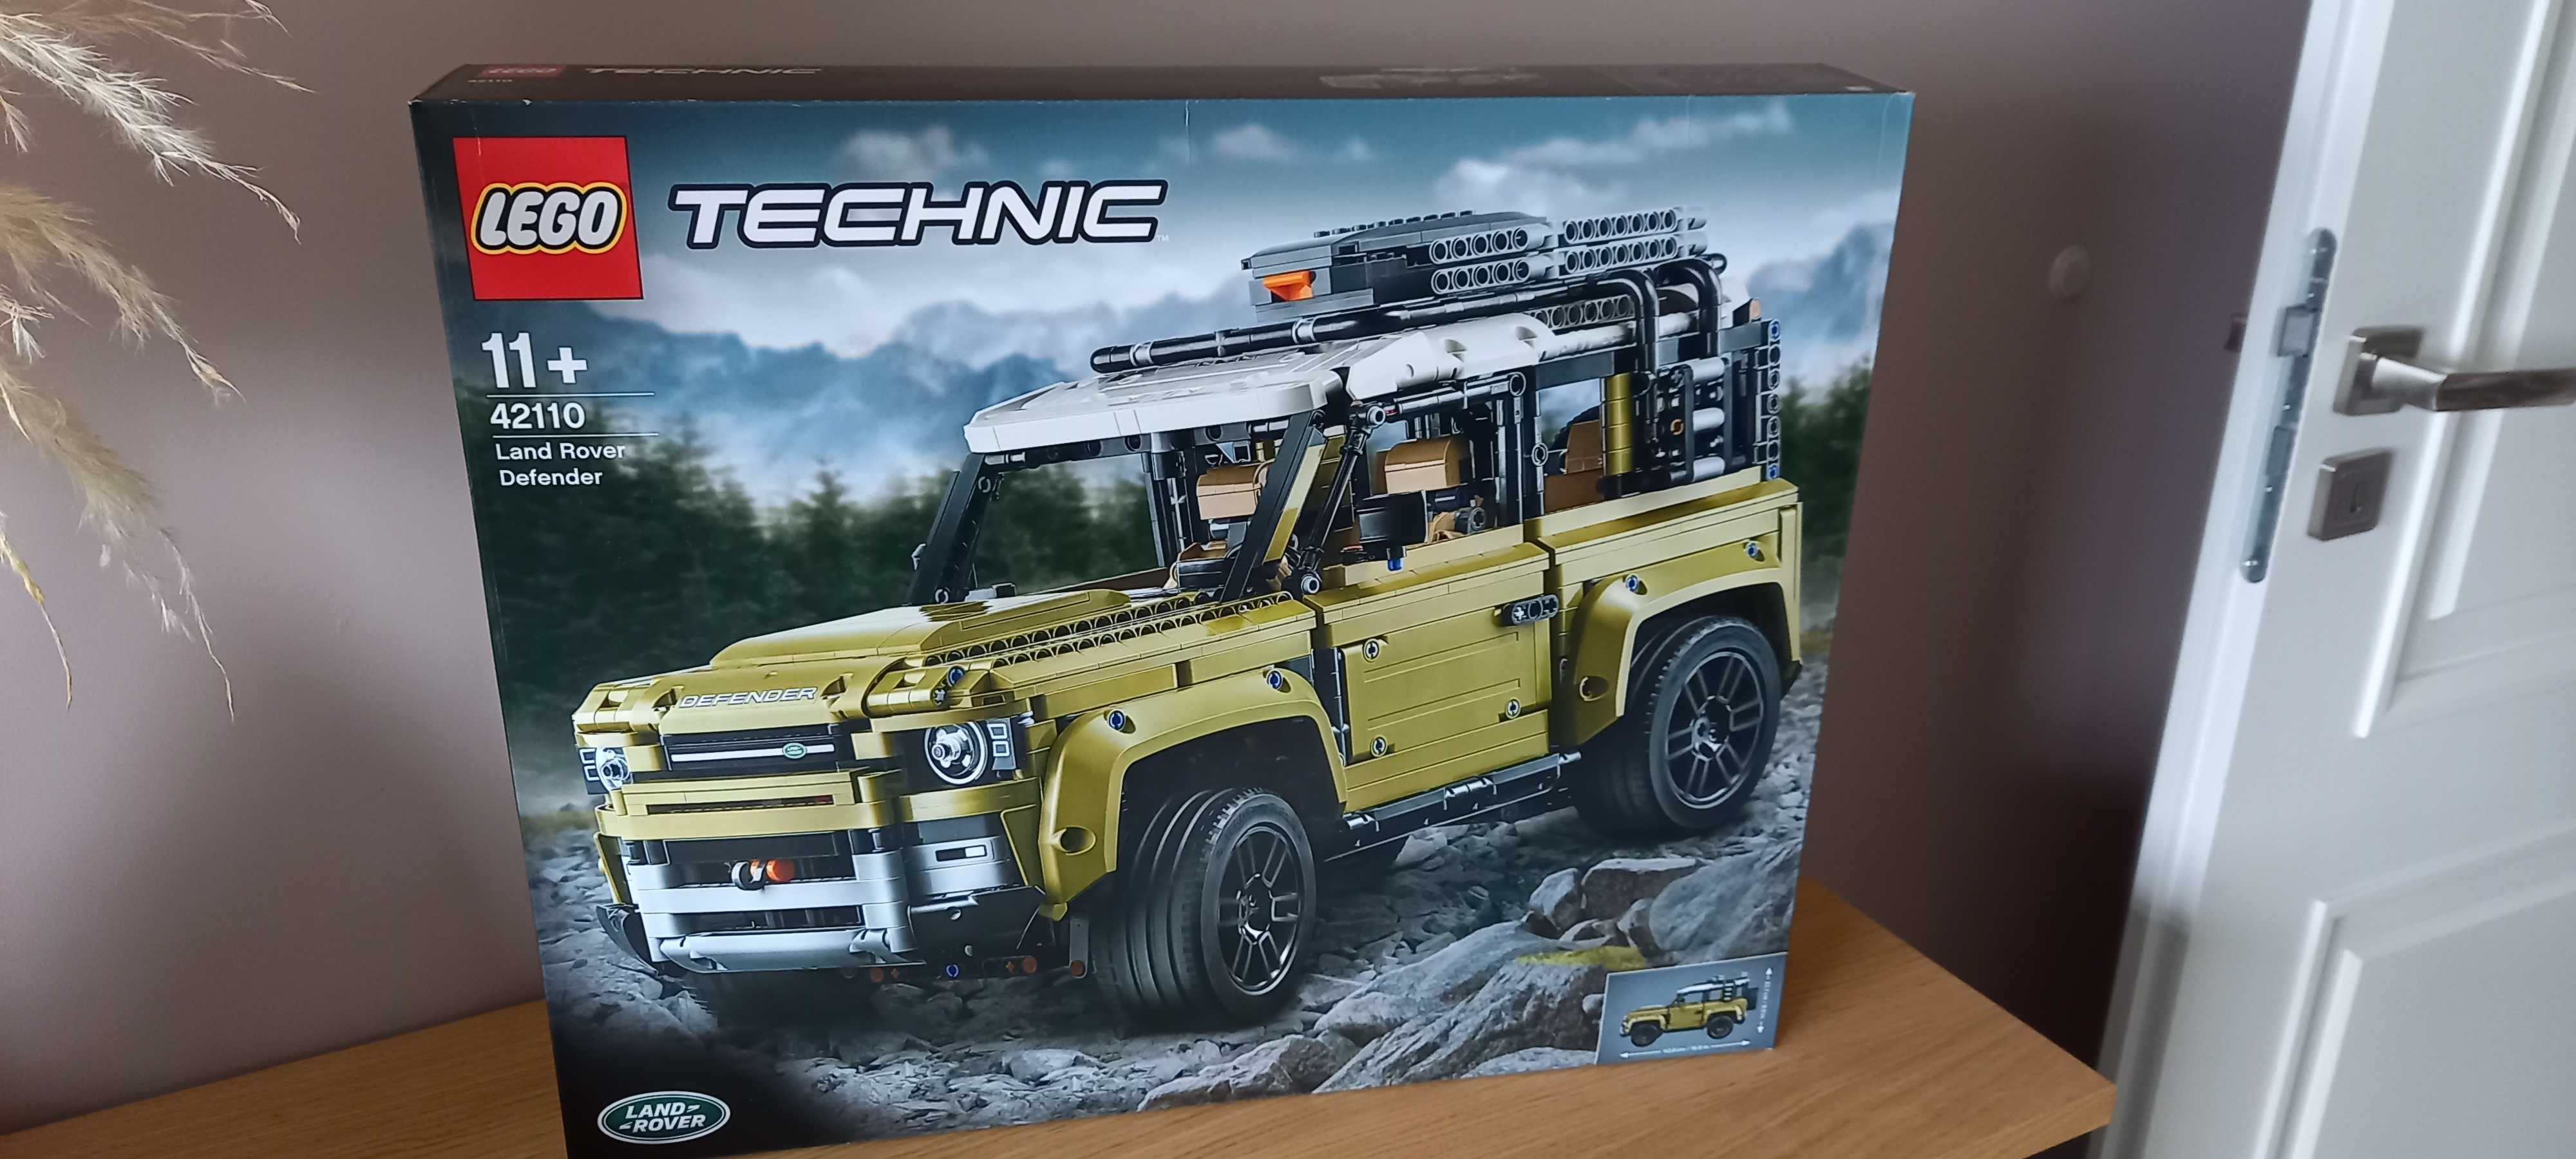 LEGO 42110 Technic - Land Rover Defender Nowy.